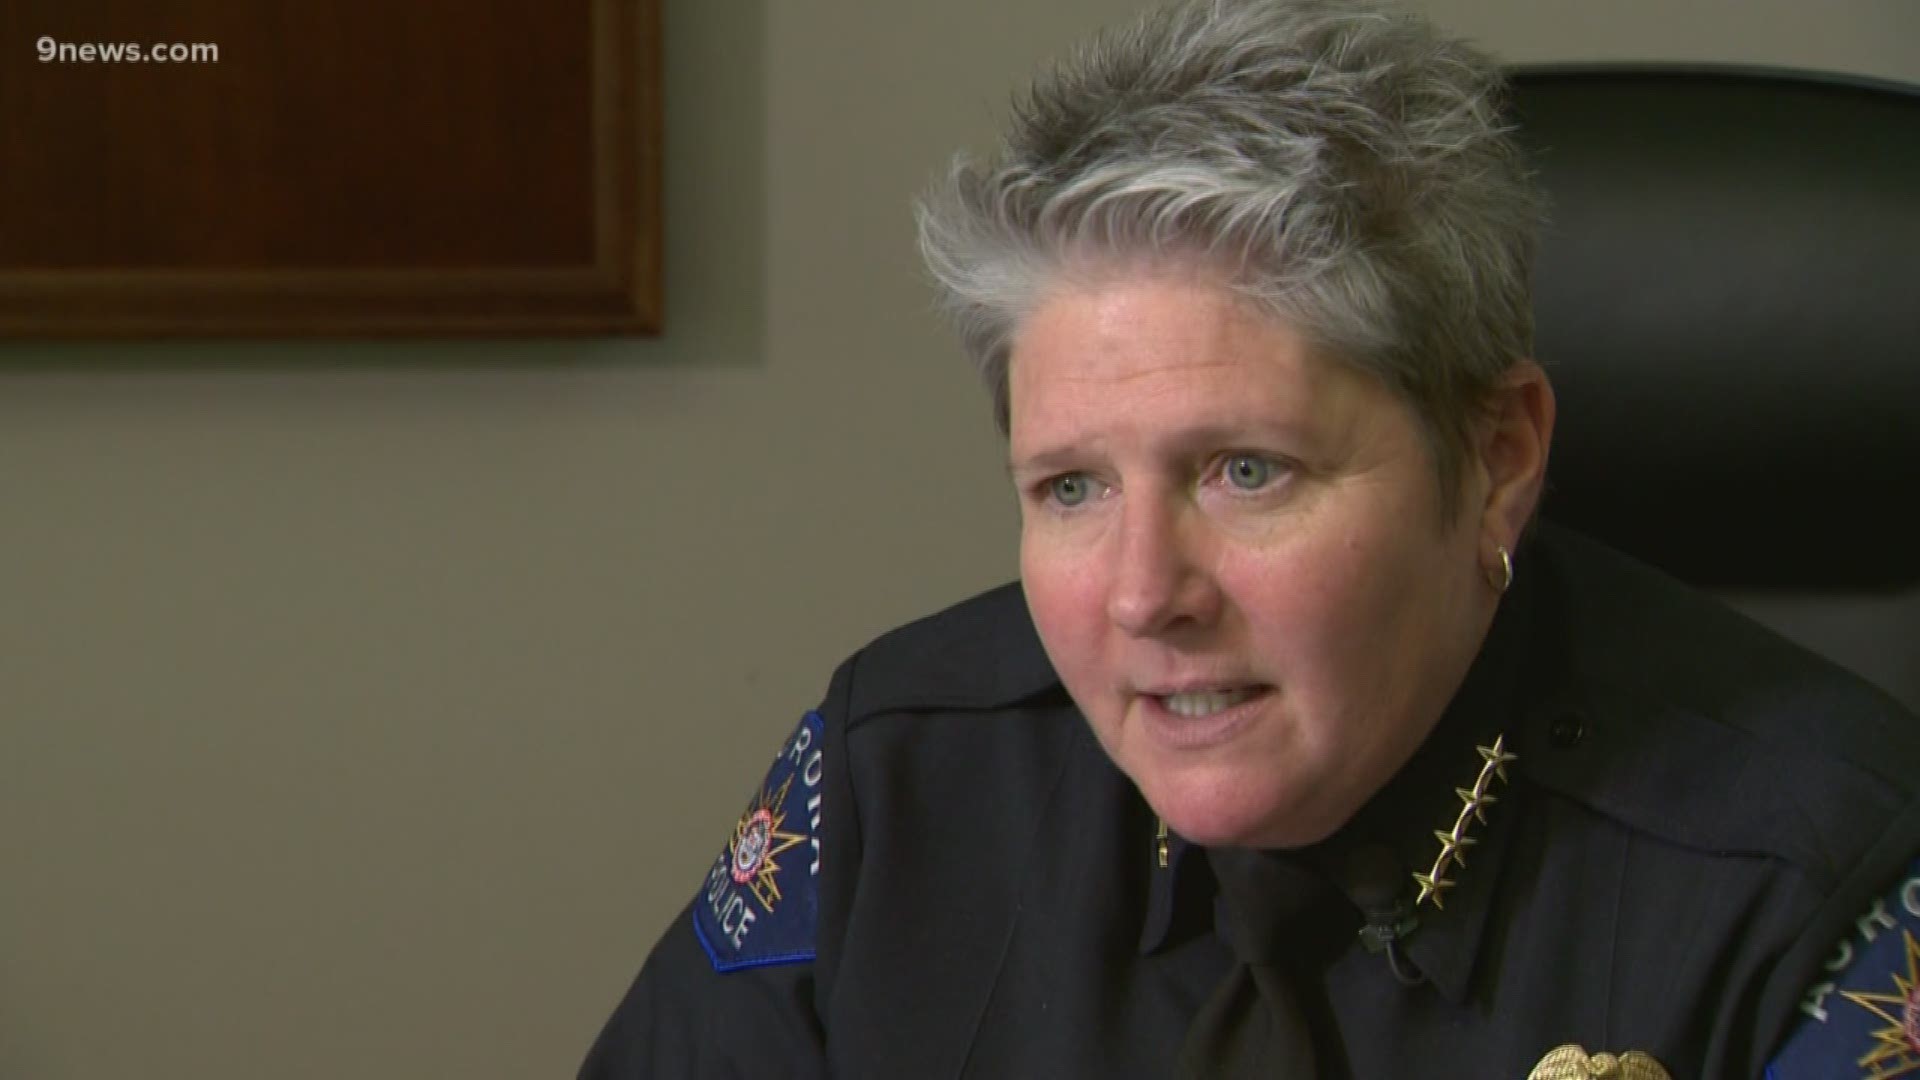 9NEWS reporter Marc Sallinger sat down to talk with the interim chief about what she's doing to fix the problems the Aurora Police Department is facing.